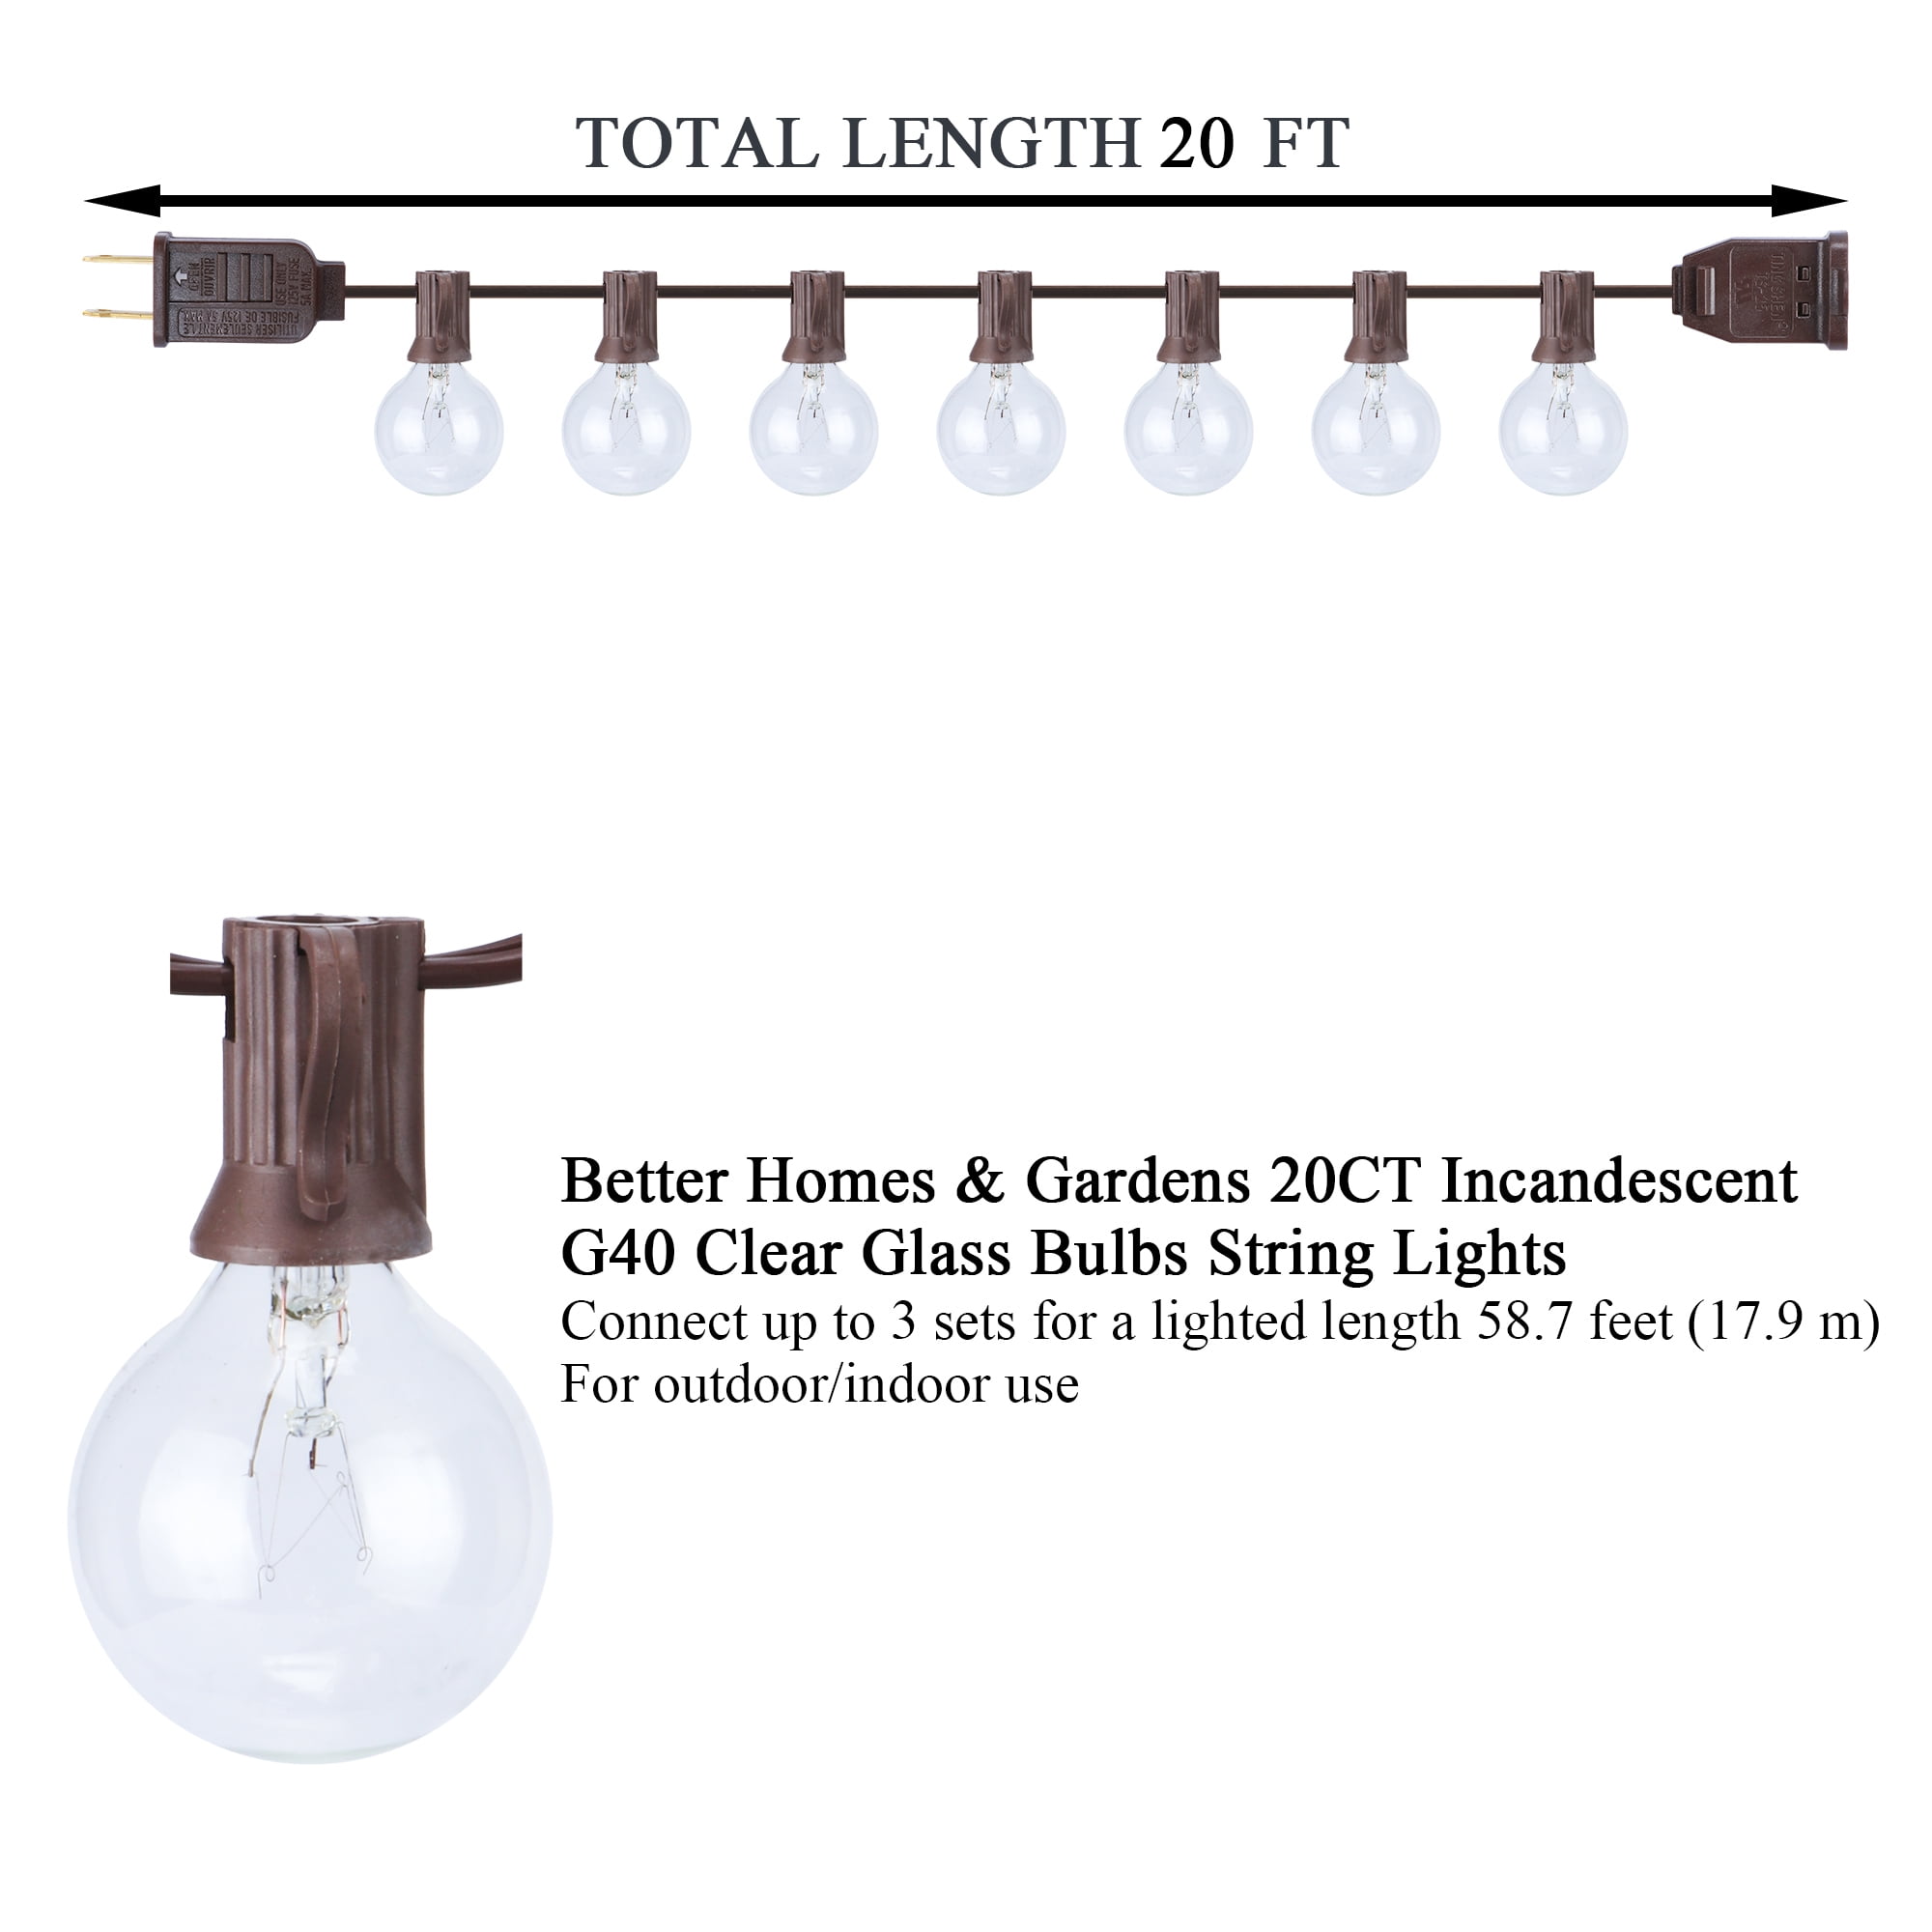 20ct Incandescent Outdoor String Lights G40 Clear Bulbs - Room